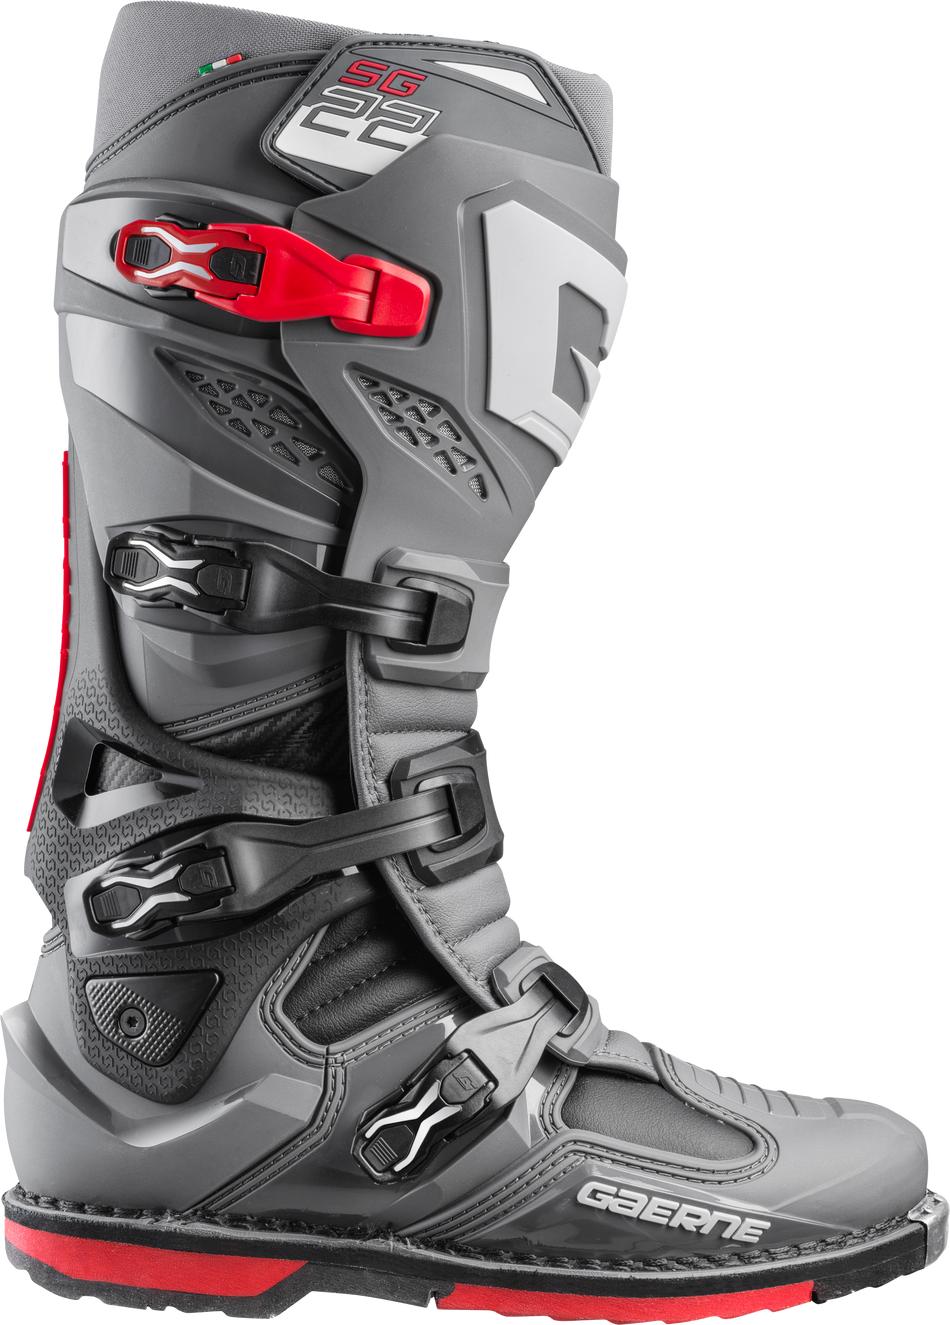 GAERNE Sg-22 Boots Anthracite/Black/Red Sz 07 2262-007-07